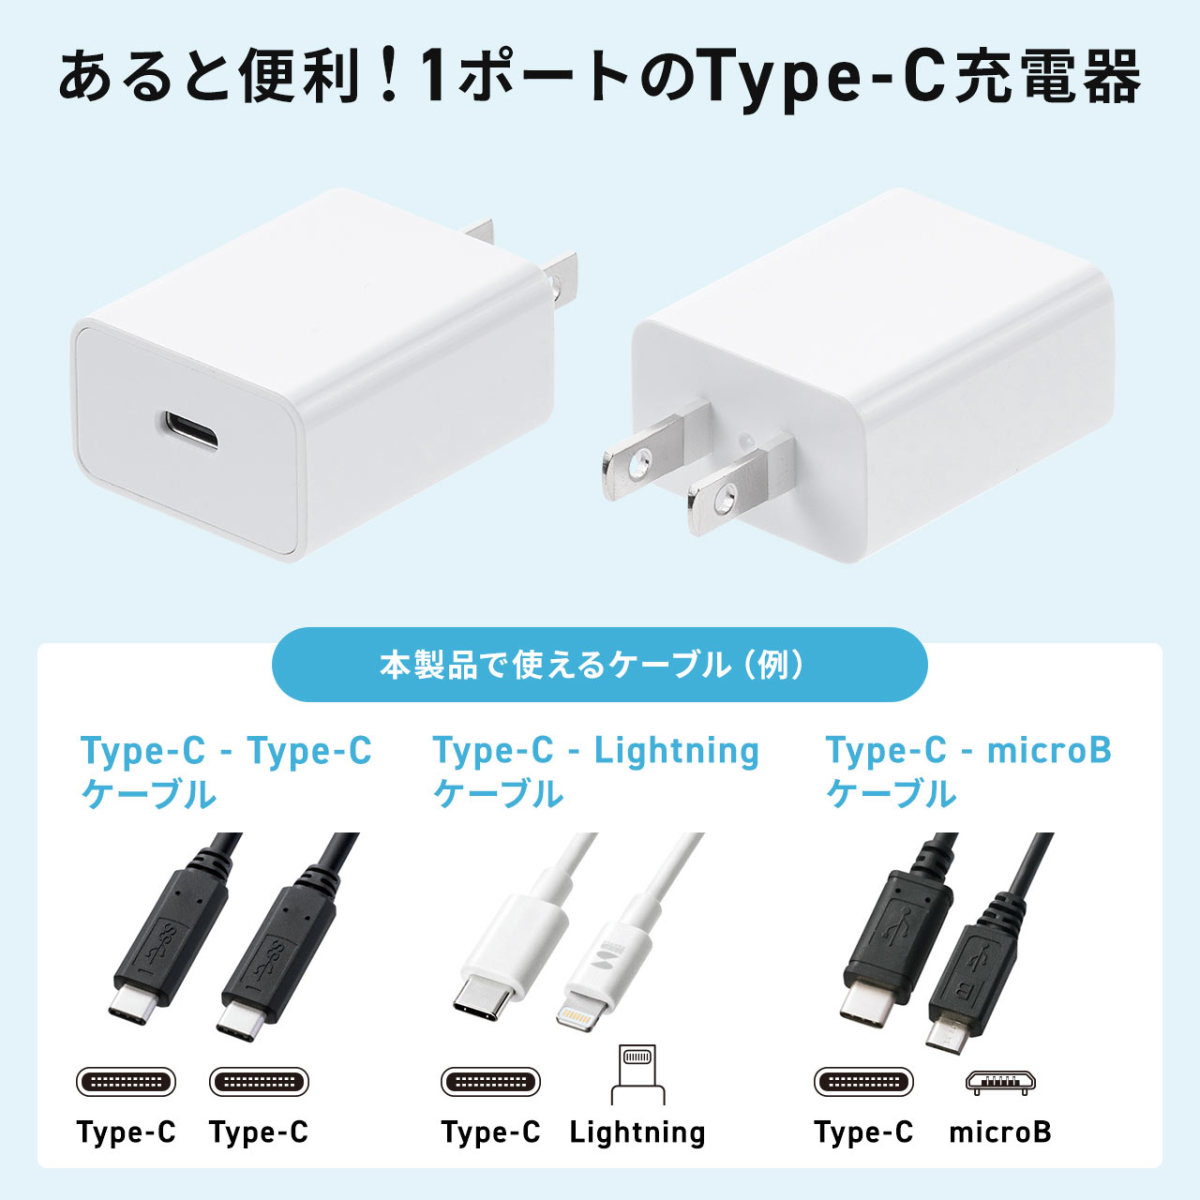 Usb充電器 10個セット スマホ 充電器 Type C 1ポート 3a出力 Acアダプター 小型 コンパクト Iphone Ipad Android コンセント サンワダイレクト 通販 Paypayモール